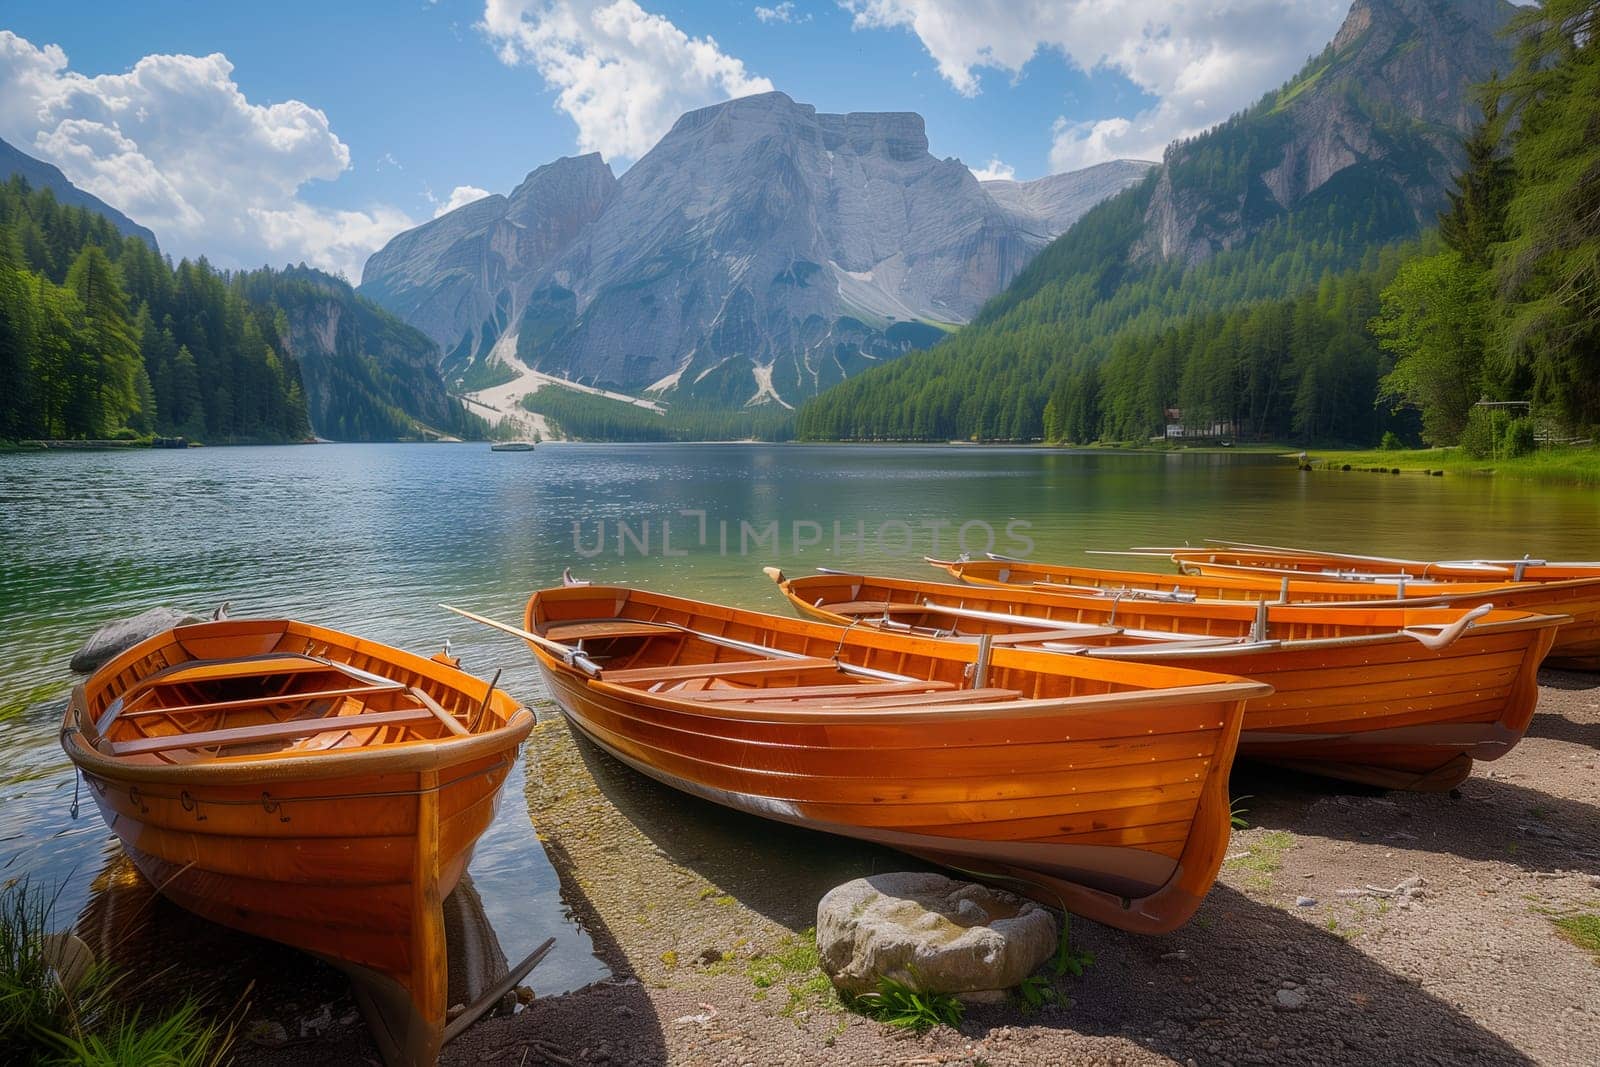 Several wooden boats resting on calm lake waters under a clear sky.